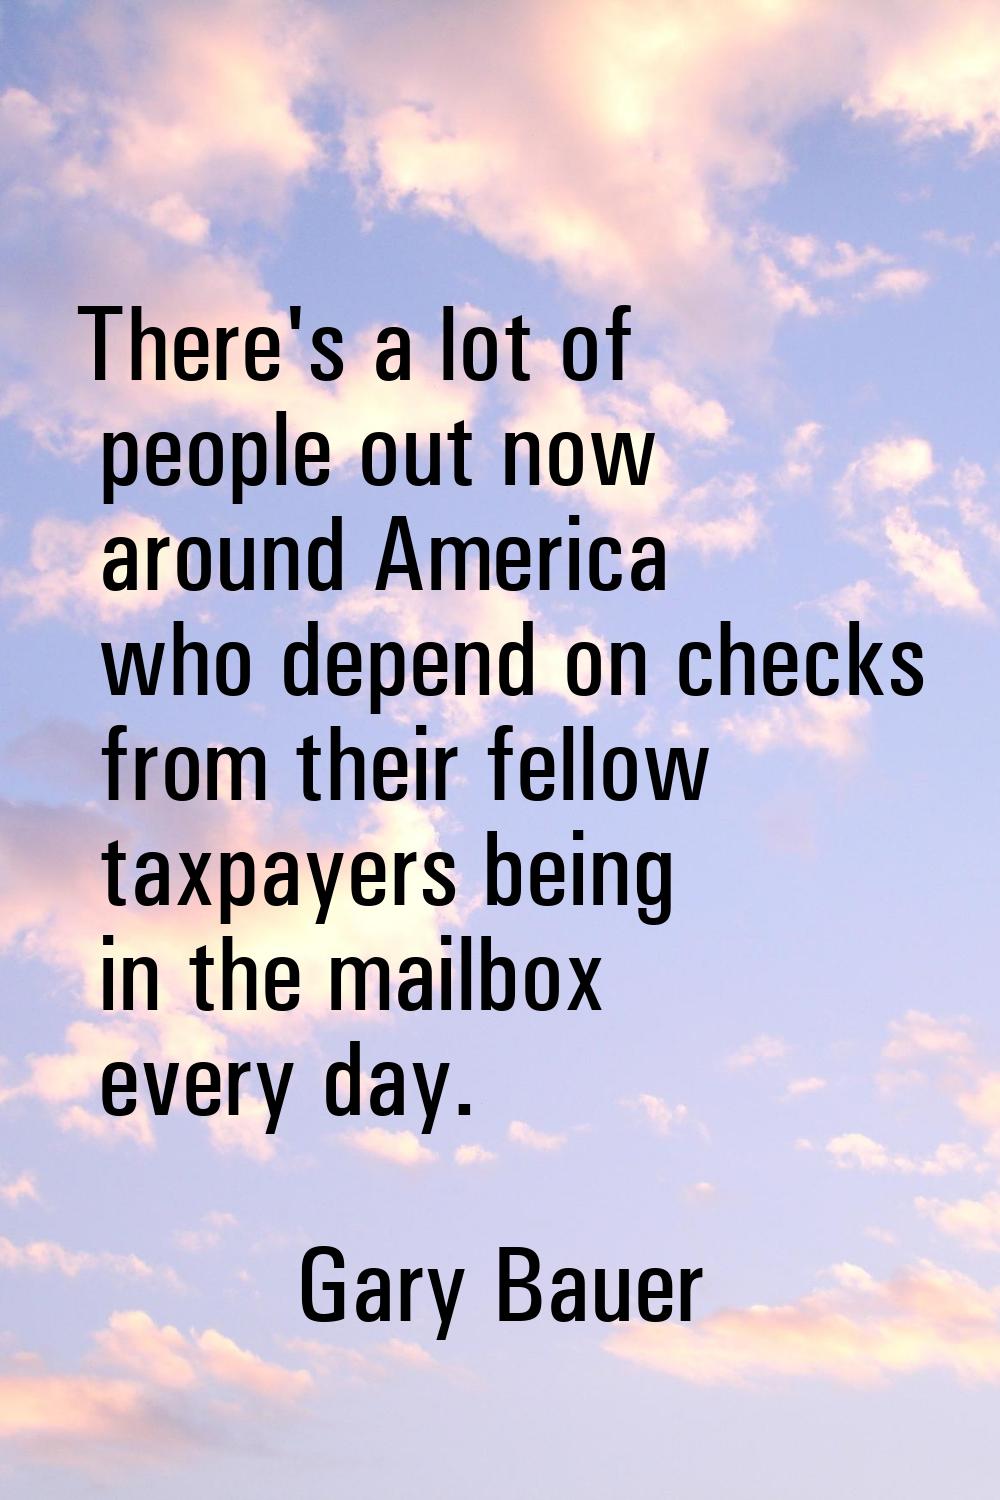 There's a lot of people out now around America who depend on checks from their fellow taxpayers bei